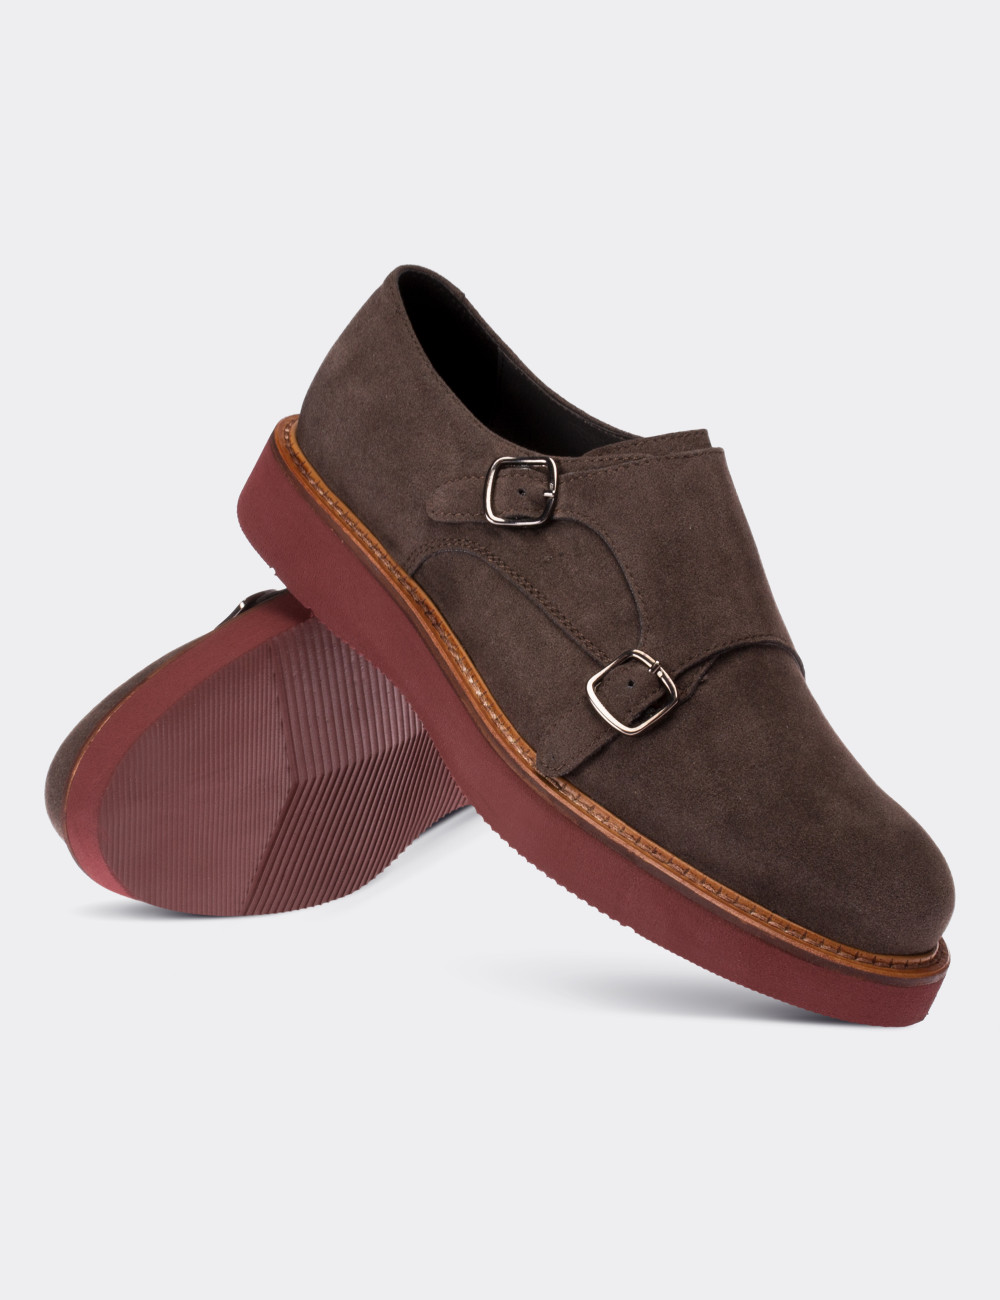 Brown Suede Leather Monk Straps Shoes - 01614ZKHVE06